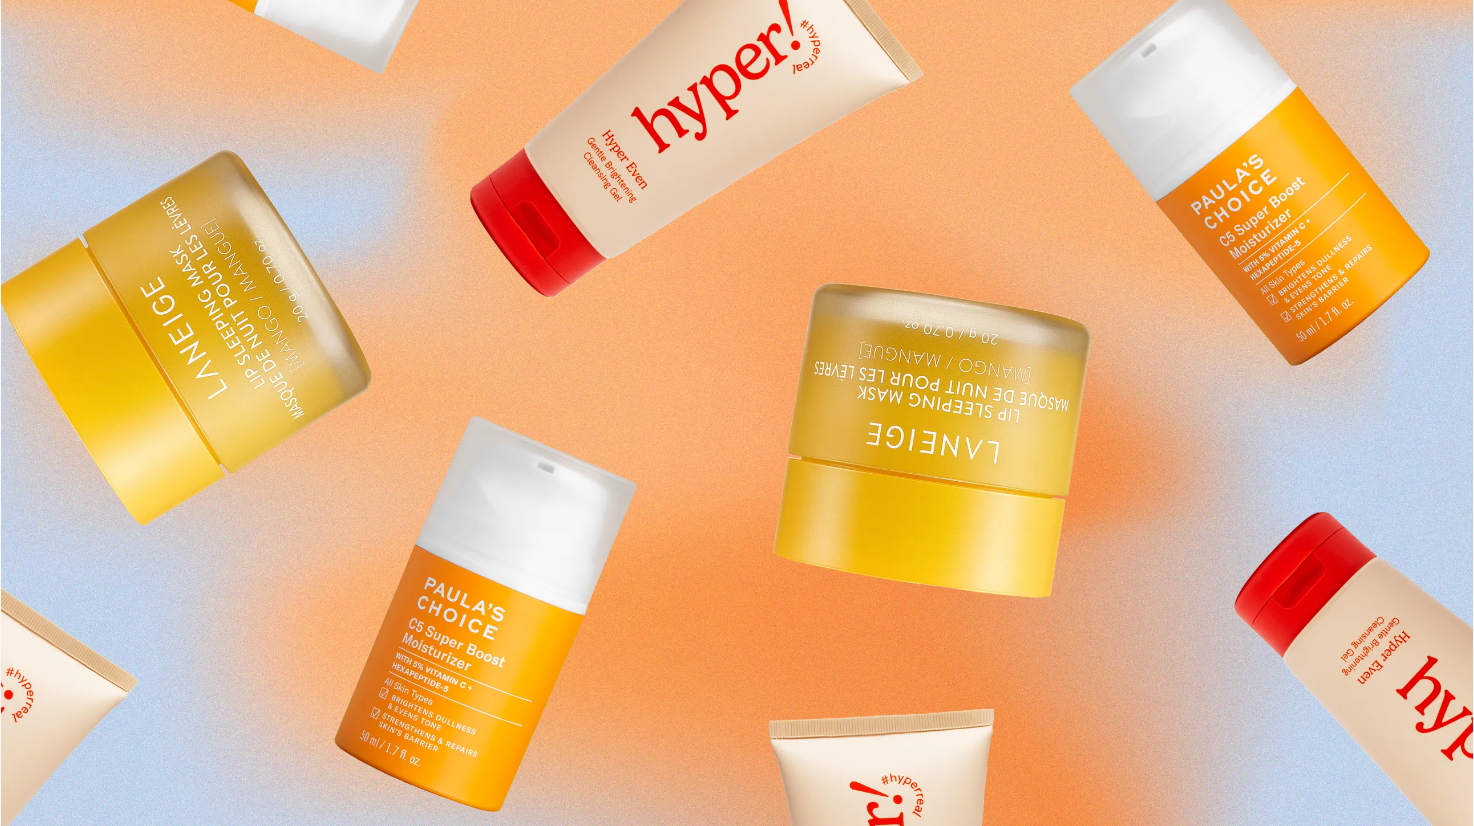 Allure: July's Skin-Care Launches Prove Peptides Deserve a Place in Your Routine